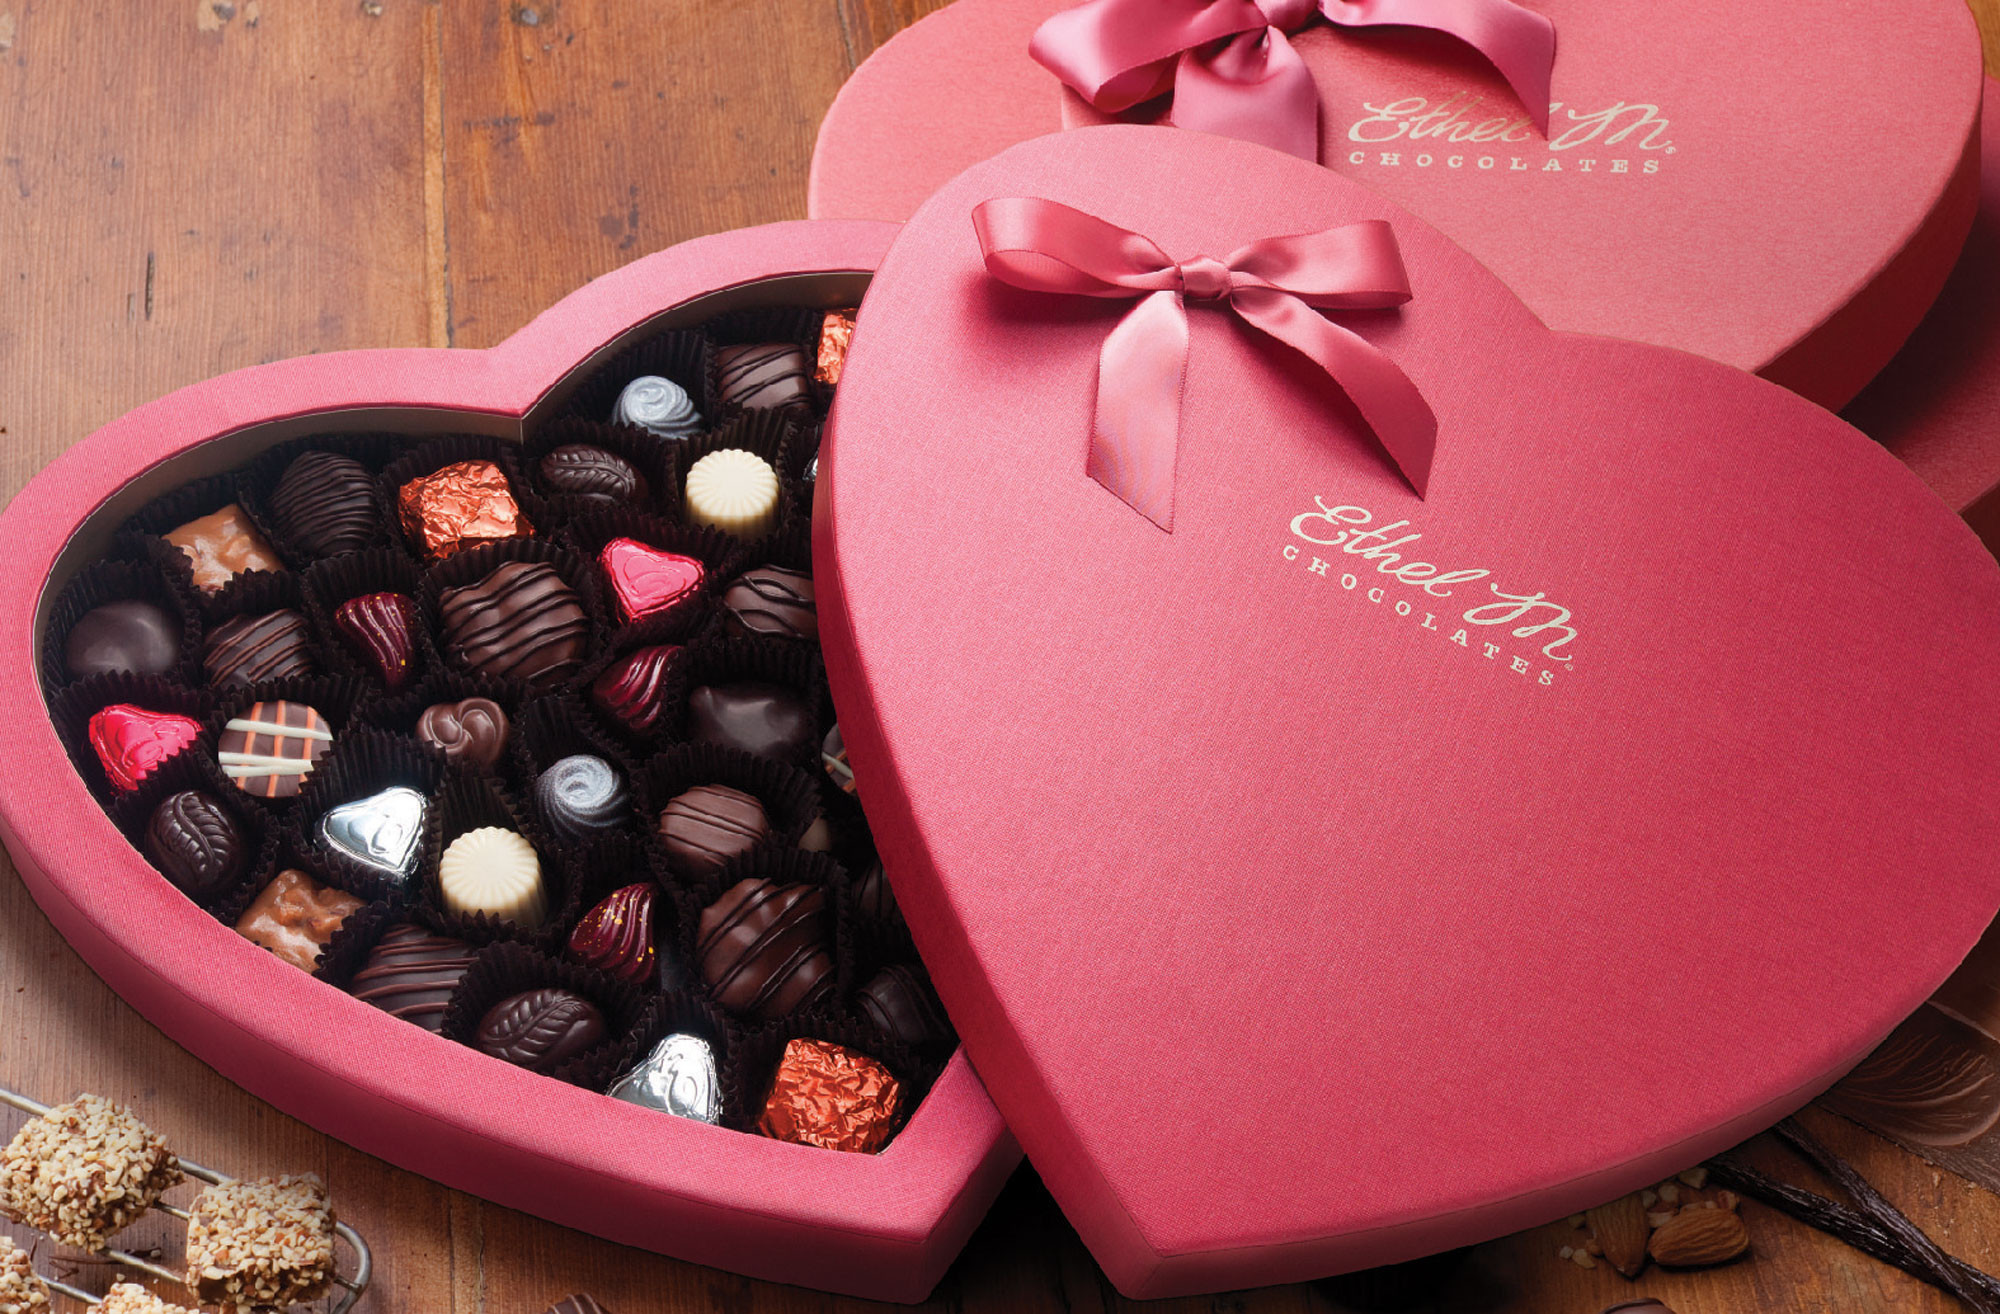 Valentines Candy Gift Ideas
 12 Best Valentines Gift Ideas For Her in This 2016